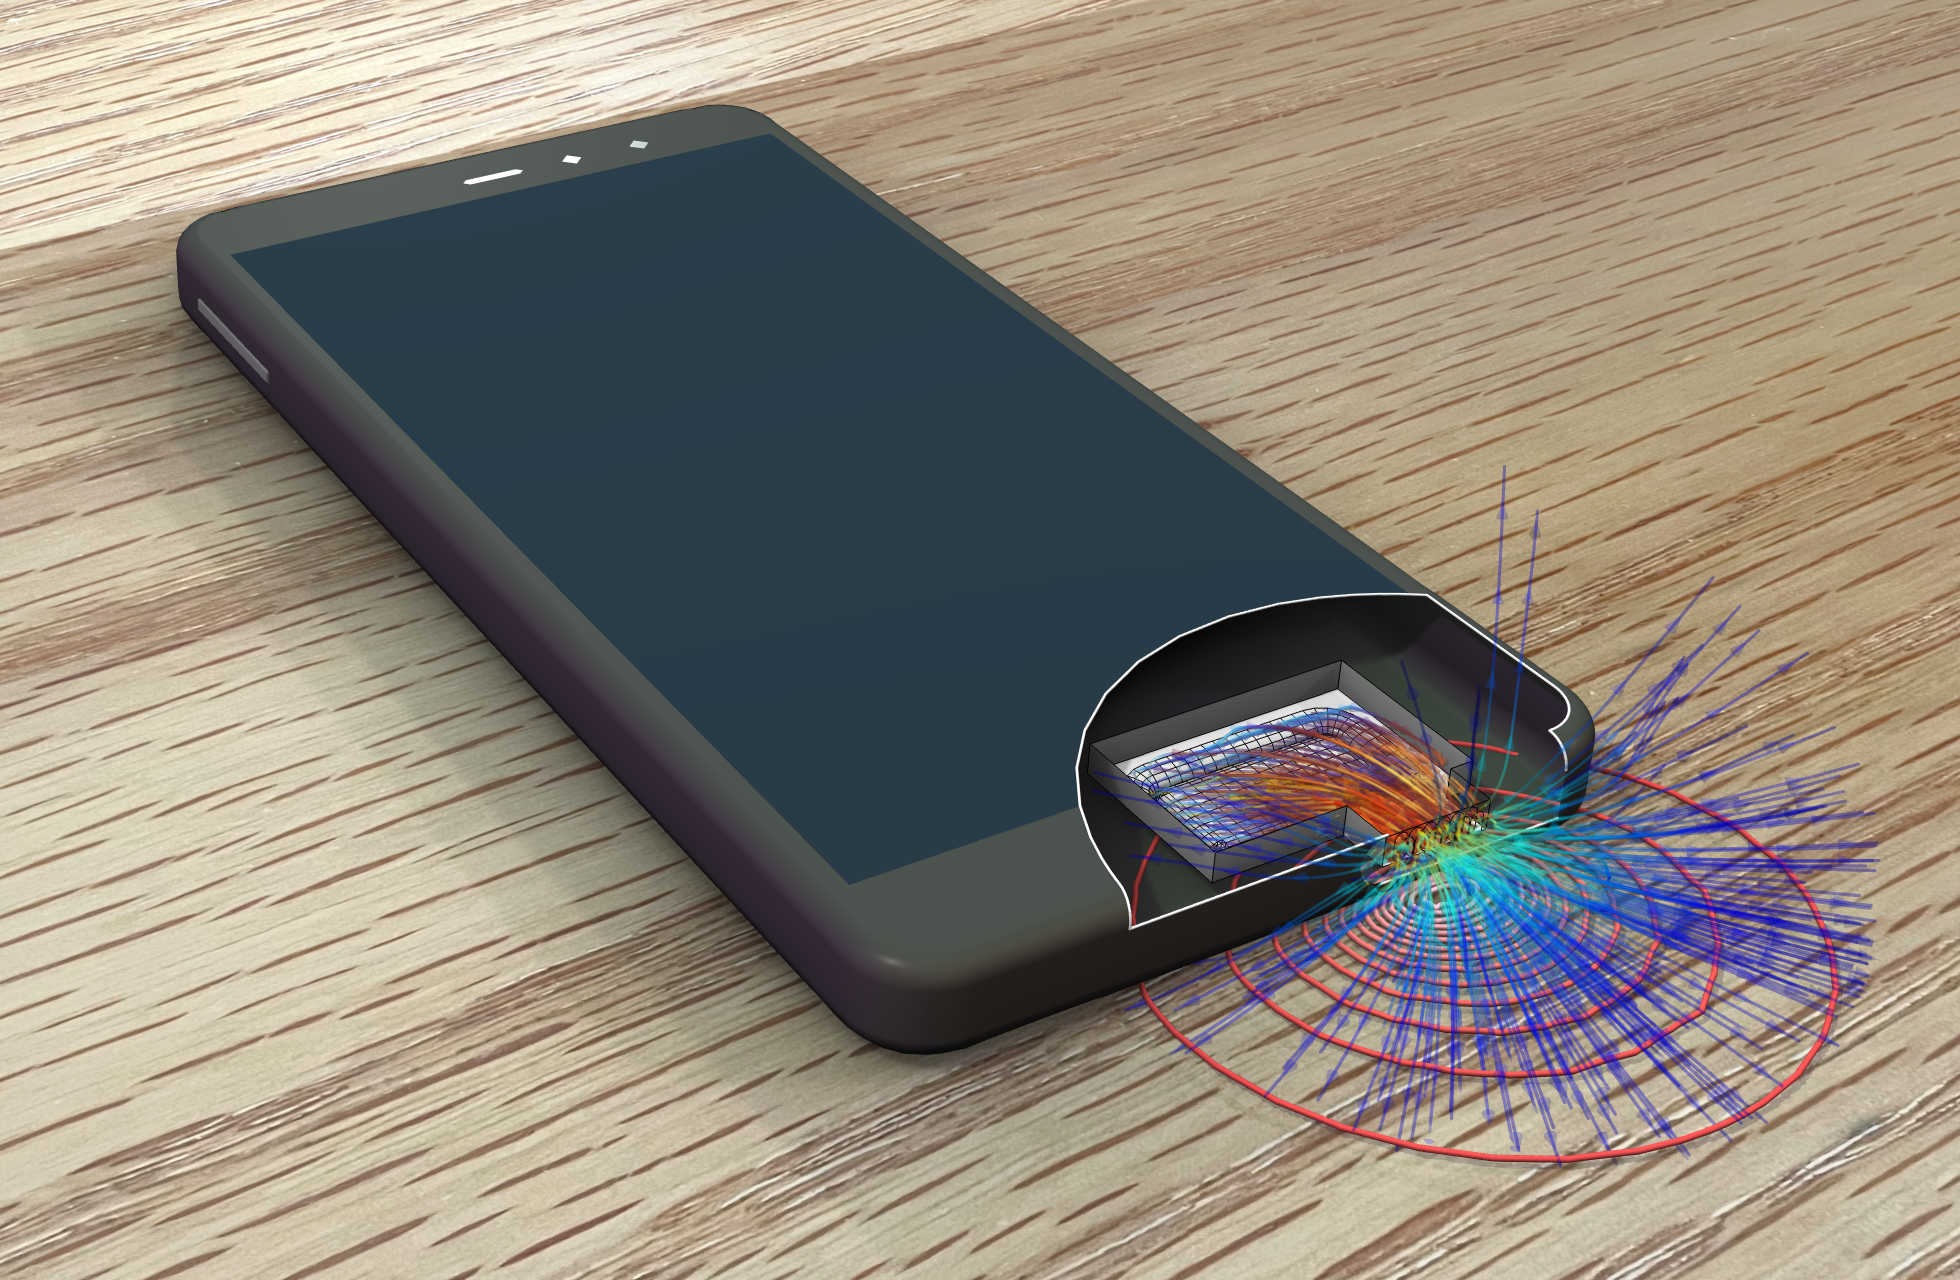 A model of a smartphone on a tabletop visualizes the radiated intensity from the microspeaker.